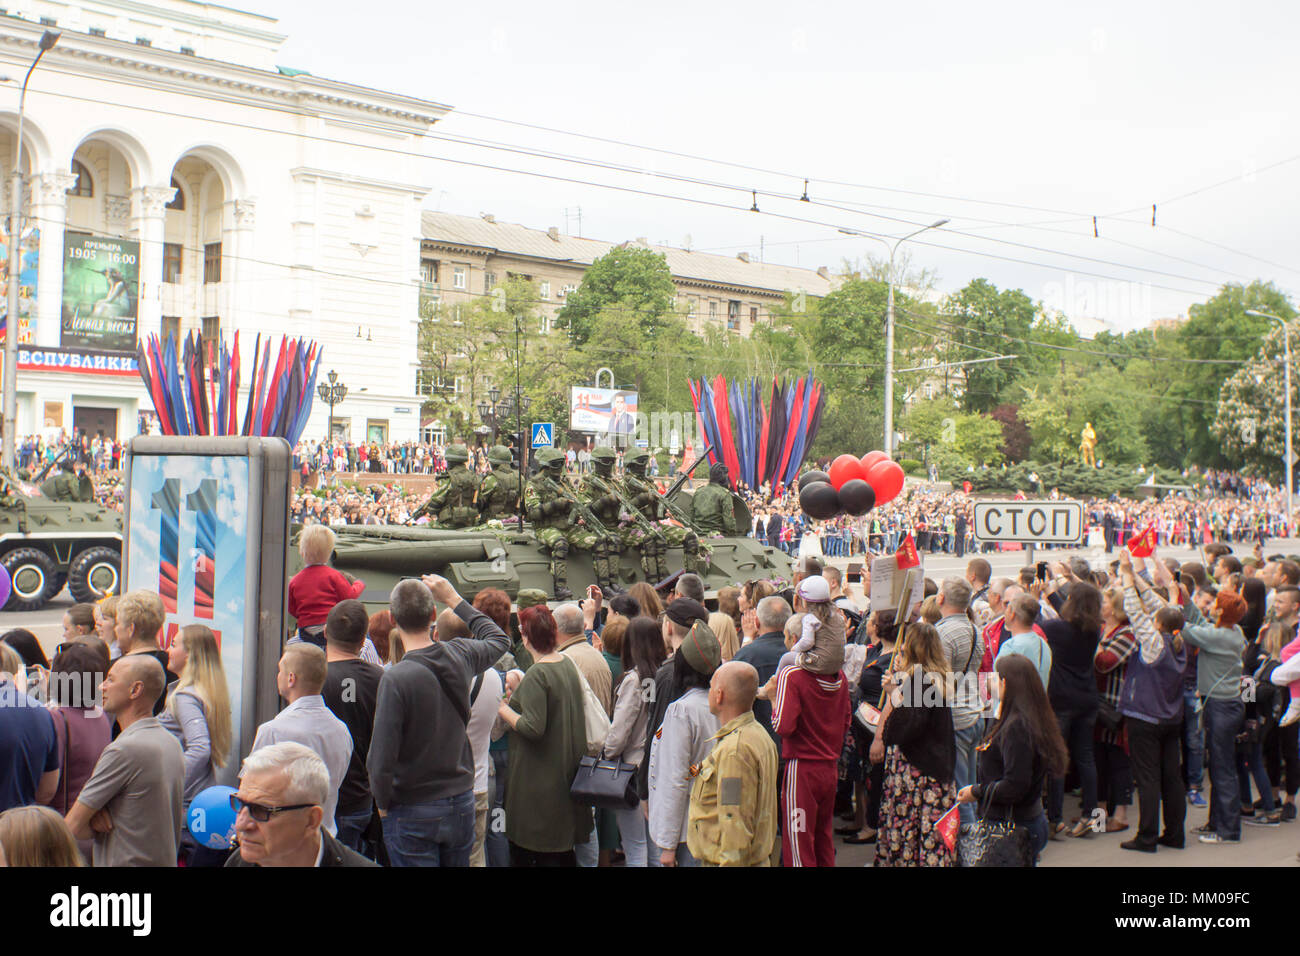 DONETSK, Donetsk People Republic. May 9, 2018: Soviet anti-air gun track with gunners on the main street of the Donetsk city during the Victory Day Parade.DONETSK, Donetsk People Republic. May 9, 2018: Soviet armored infantry support machine on the main street of the Donetsk city during the Victory Day Parade. Credit: An147/Alamy Live News Stock Photo